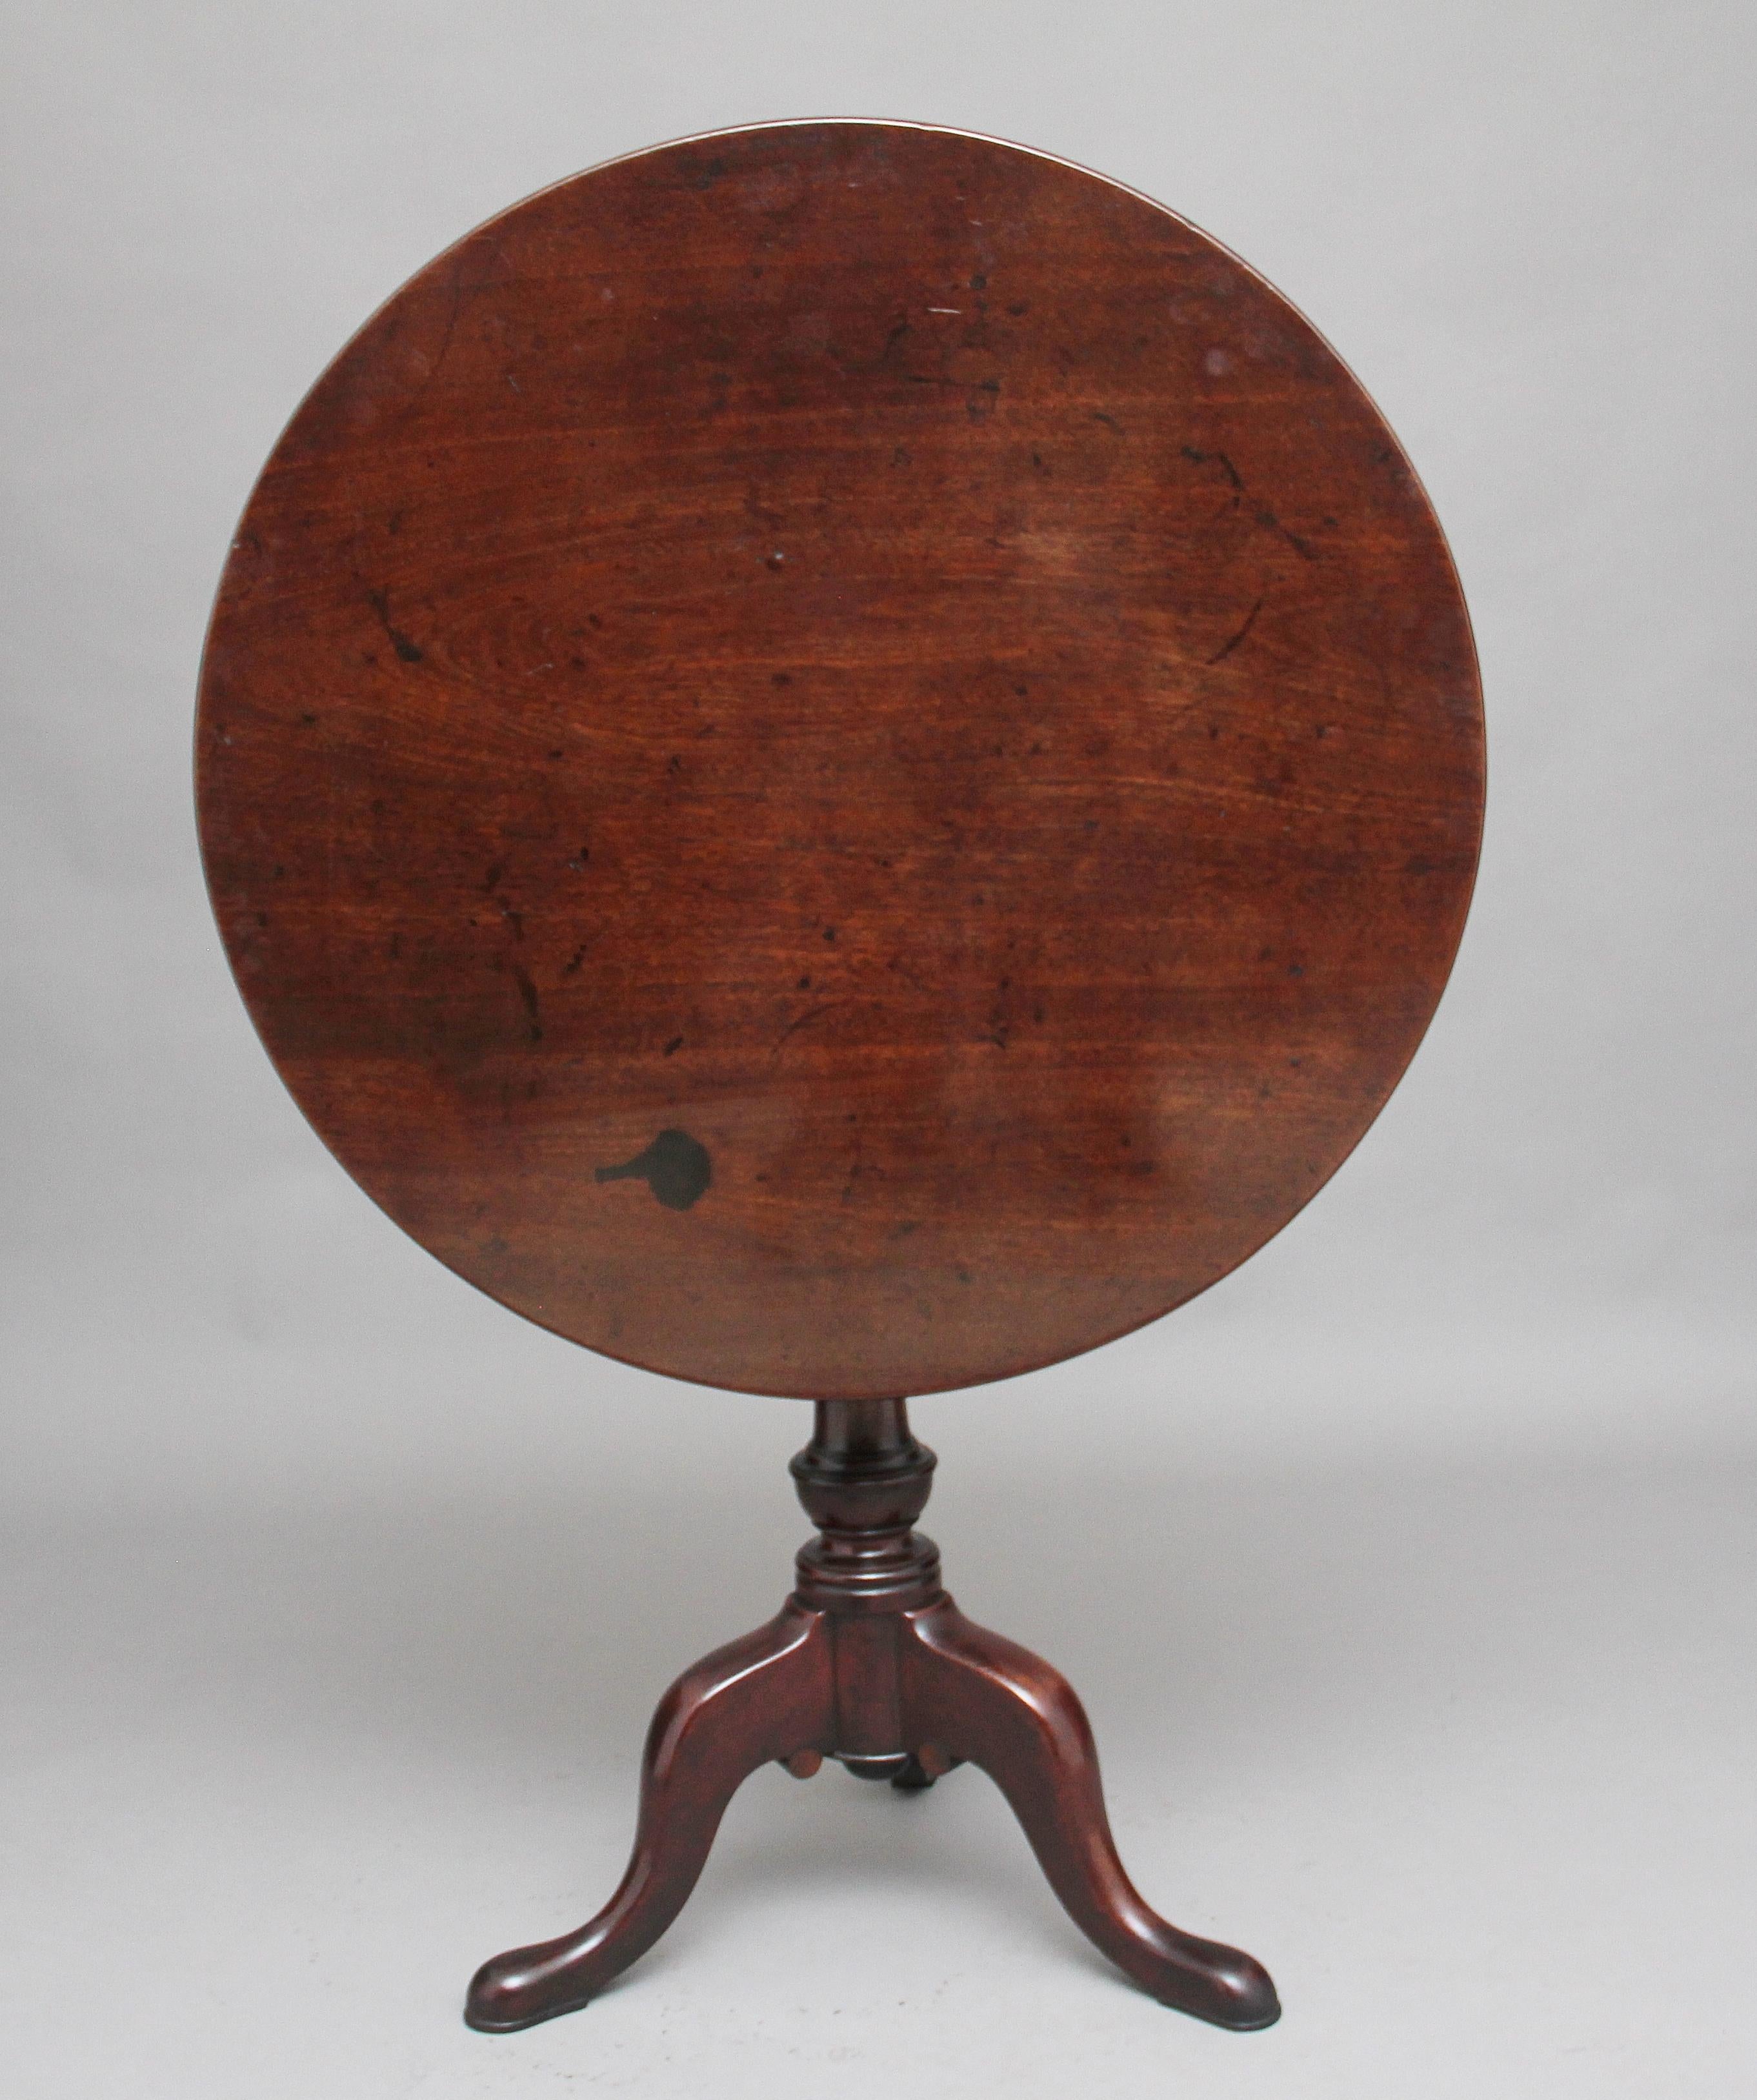 18th century mahogany tripod table, the circular mahogany top sitting on a birdcage mount so you can turn the top without turning the base, supported on a turned column terminating with three slender shaped legs, circa 1780.